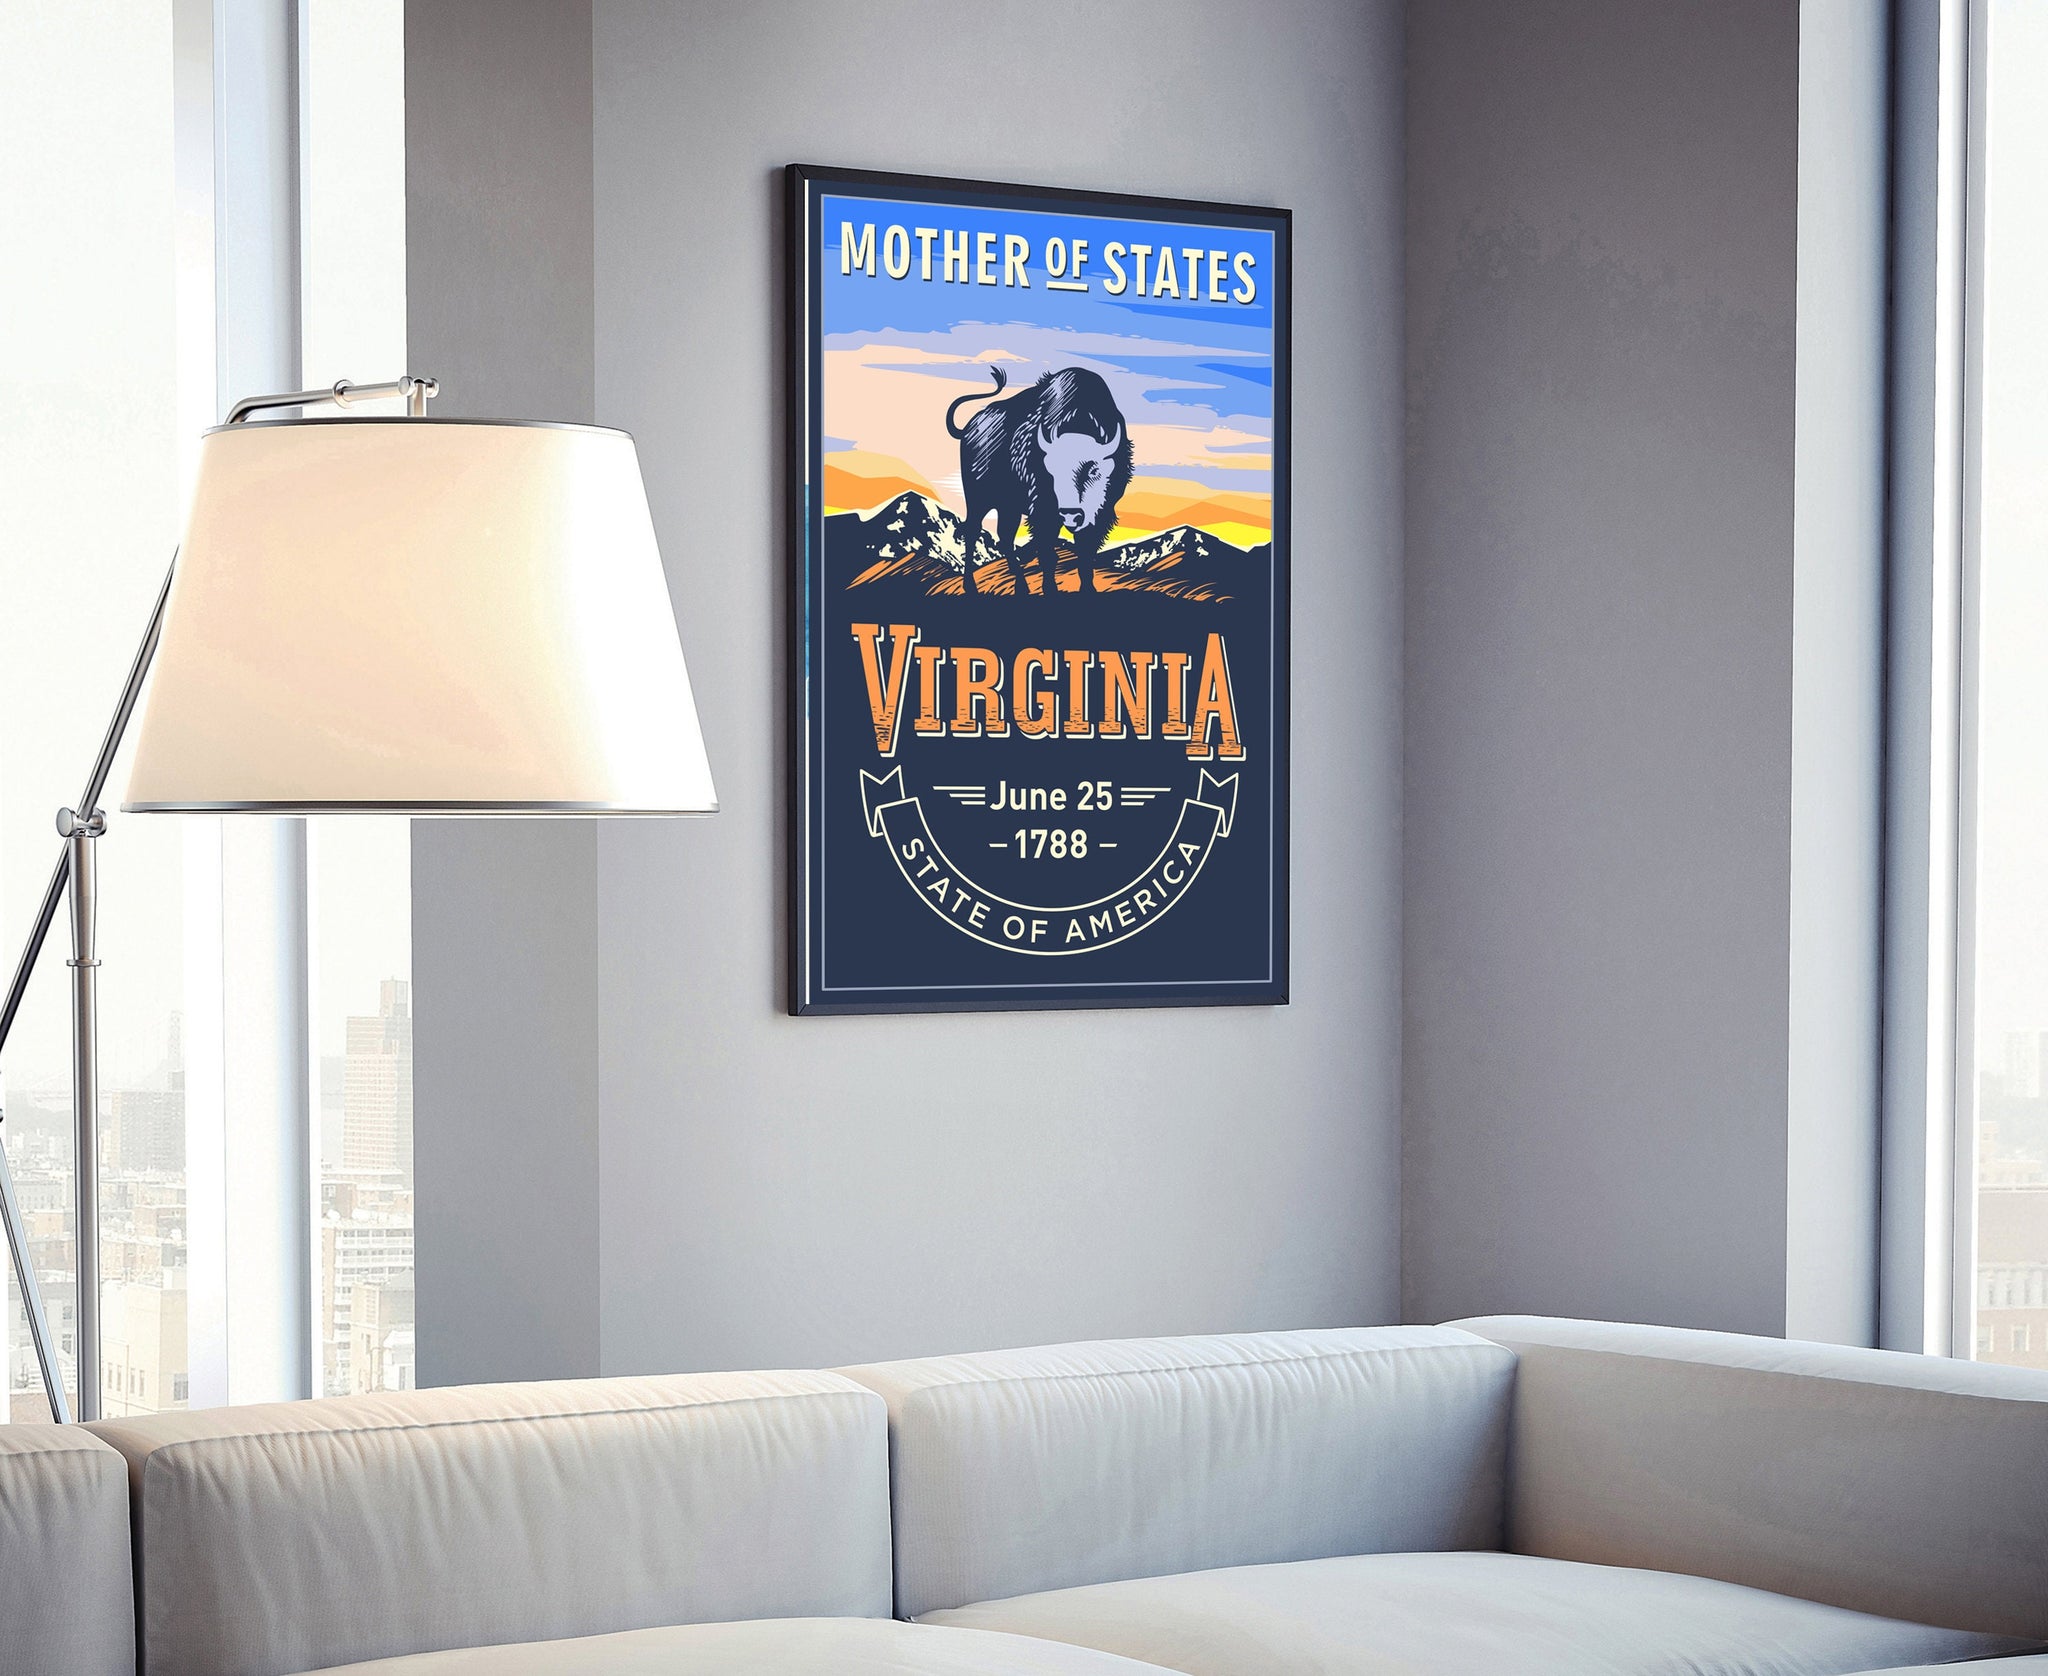 United States Poster, Virginia State Poster Print, Virginia State Emblem Poster, Retro Travel State Poster, Home Wall Art, Office Wall Art